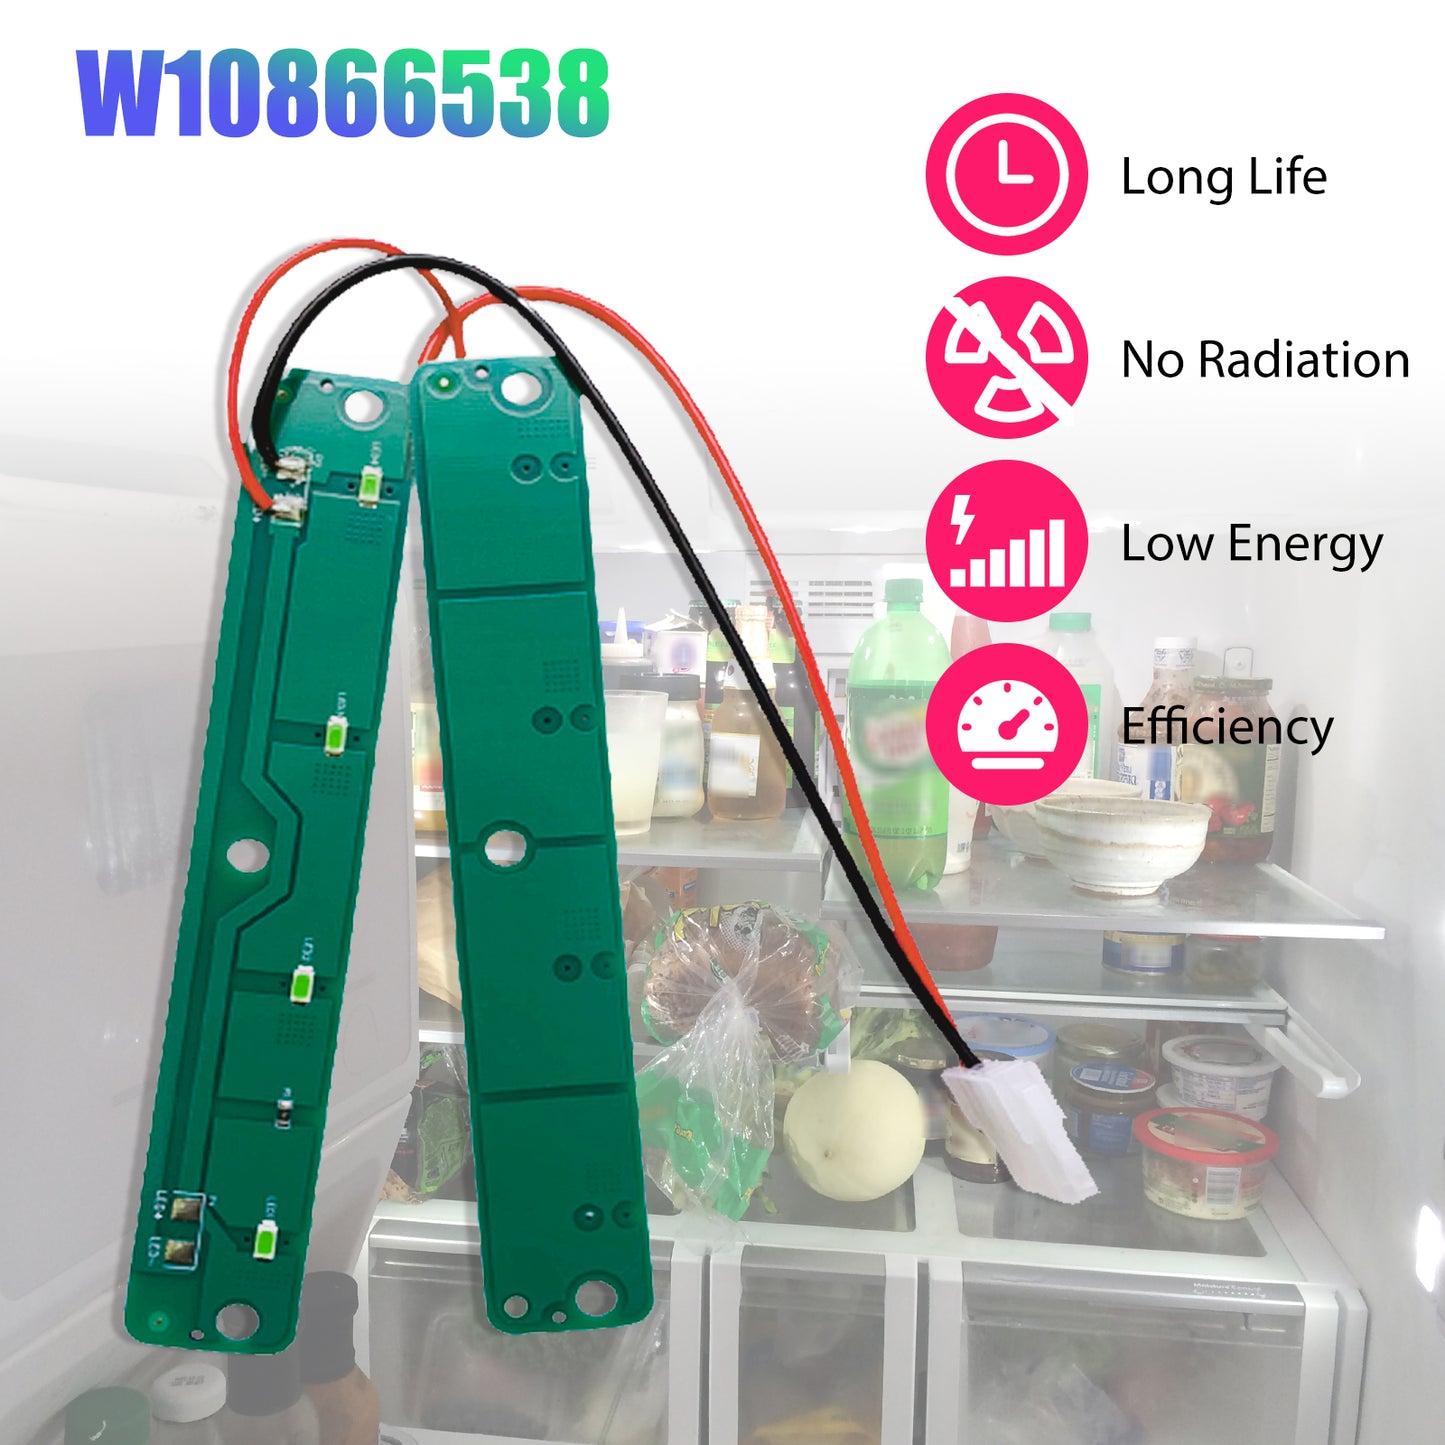 LED light Assembly Boards for Whirlpool Refrigerator W10866538